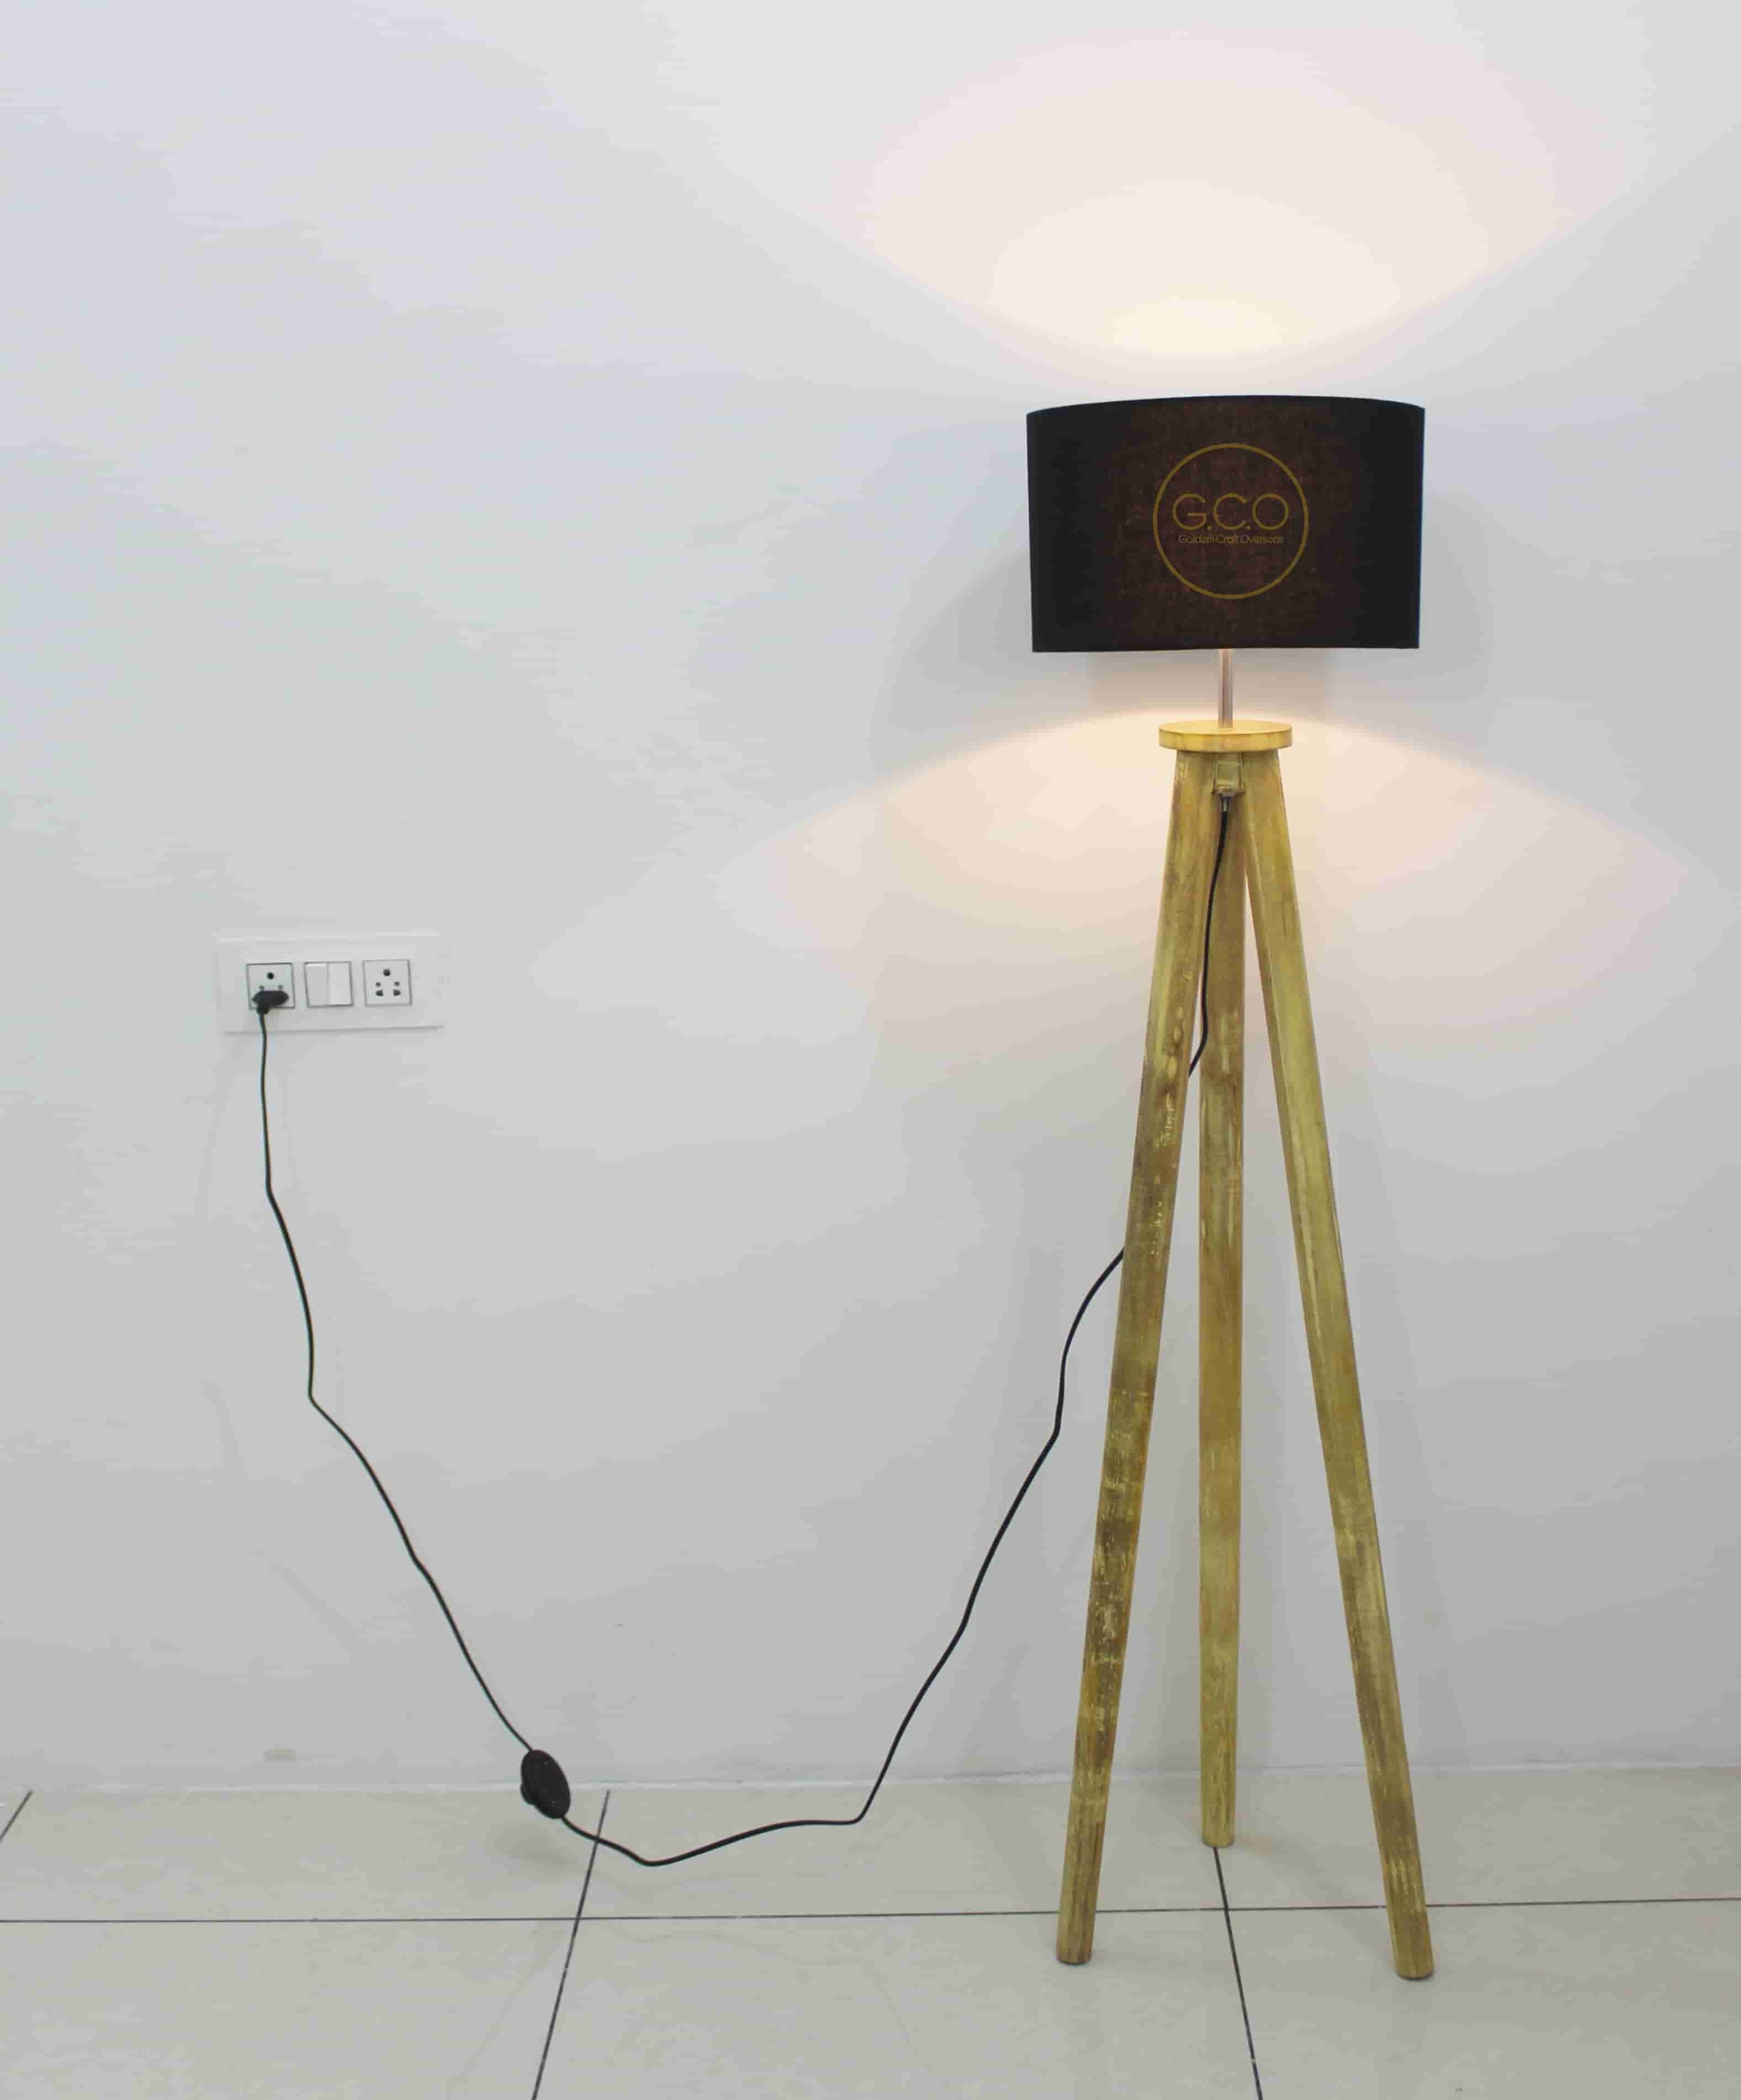 Wooden Tripod Floor Lamp with black cotton shade for interior decors